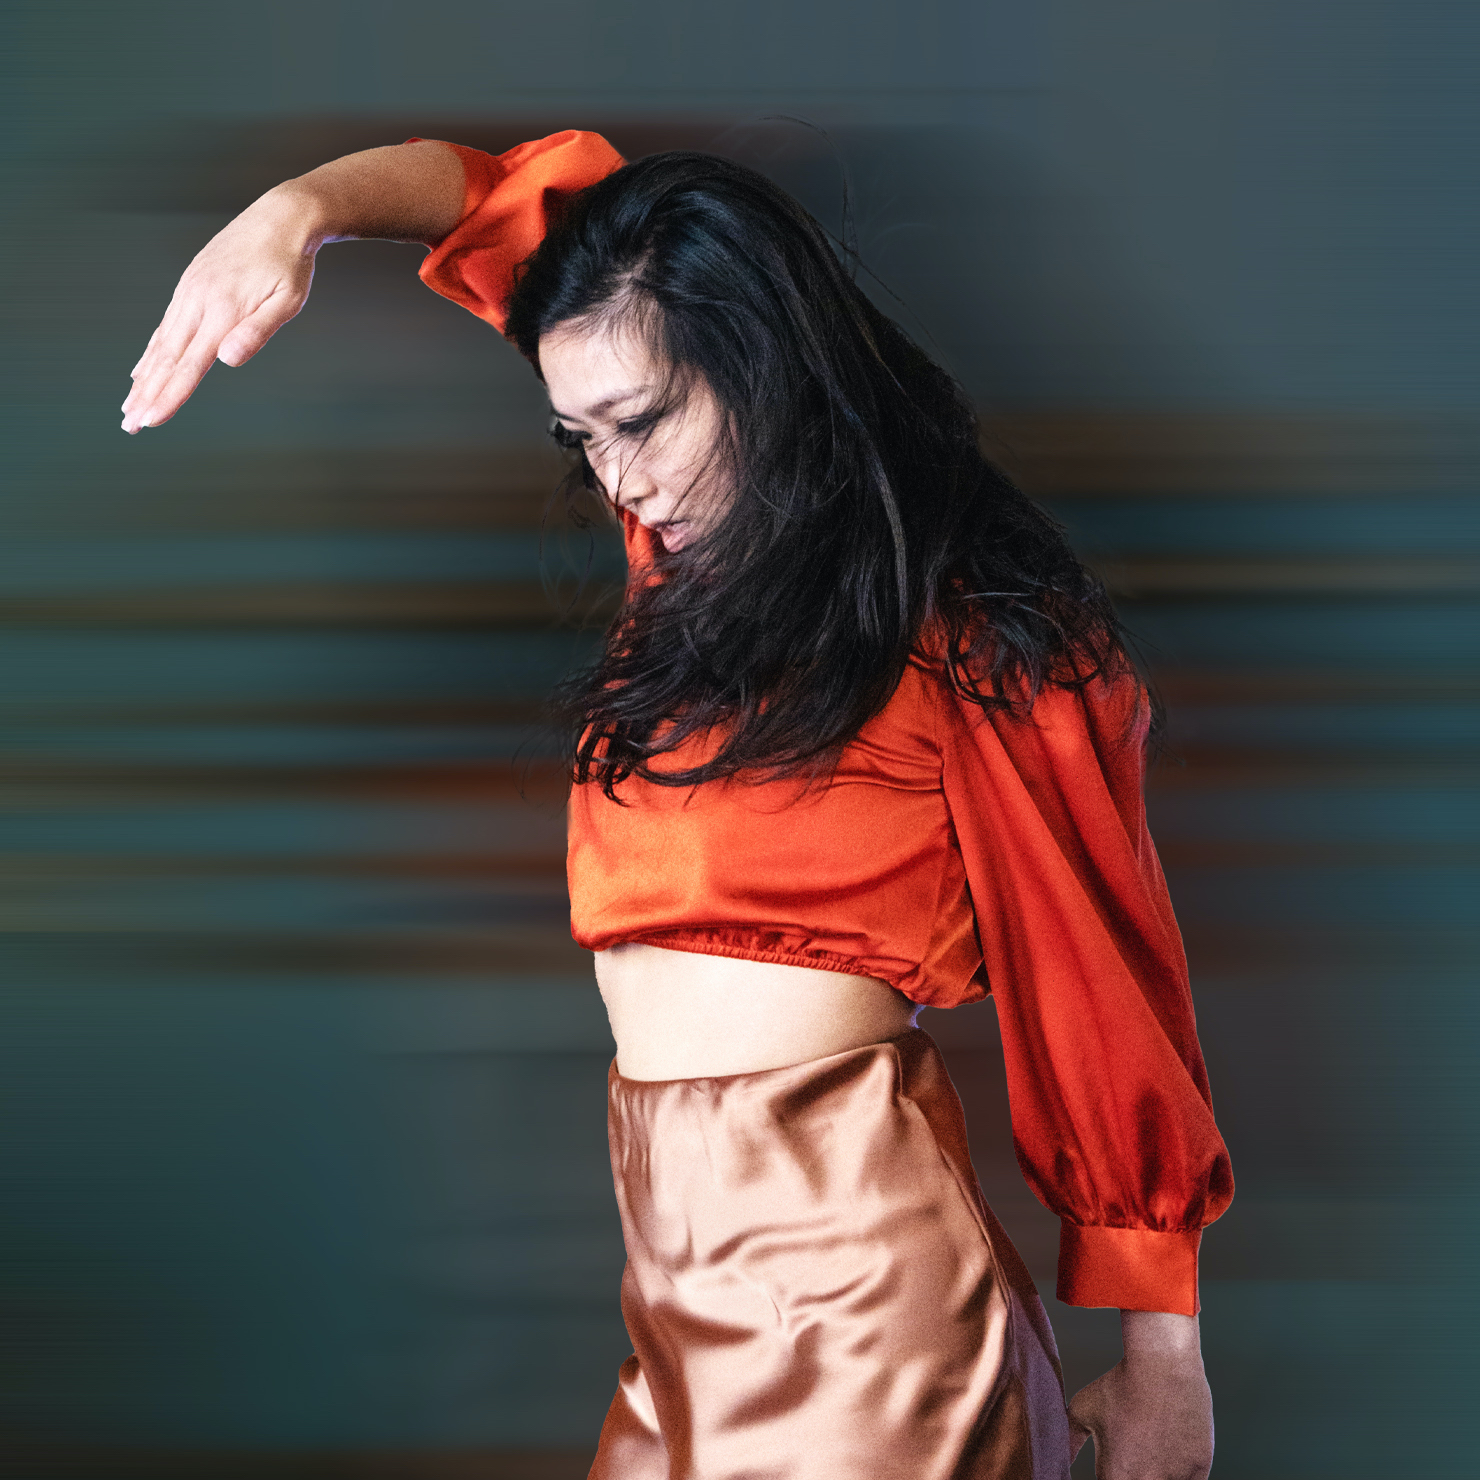 dancer in orange with a focused gaze and raised arm